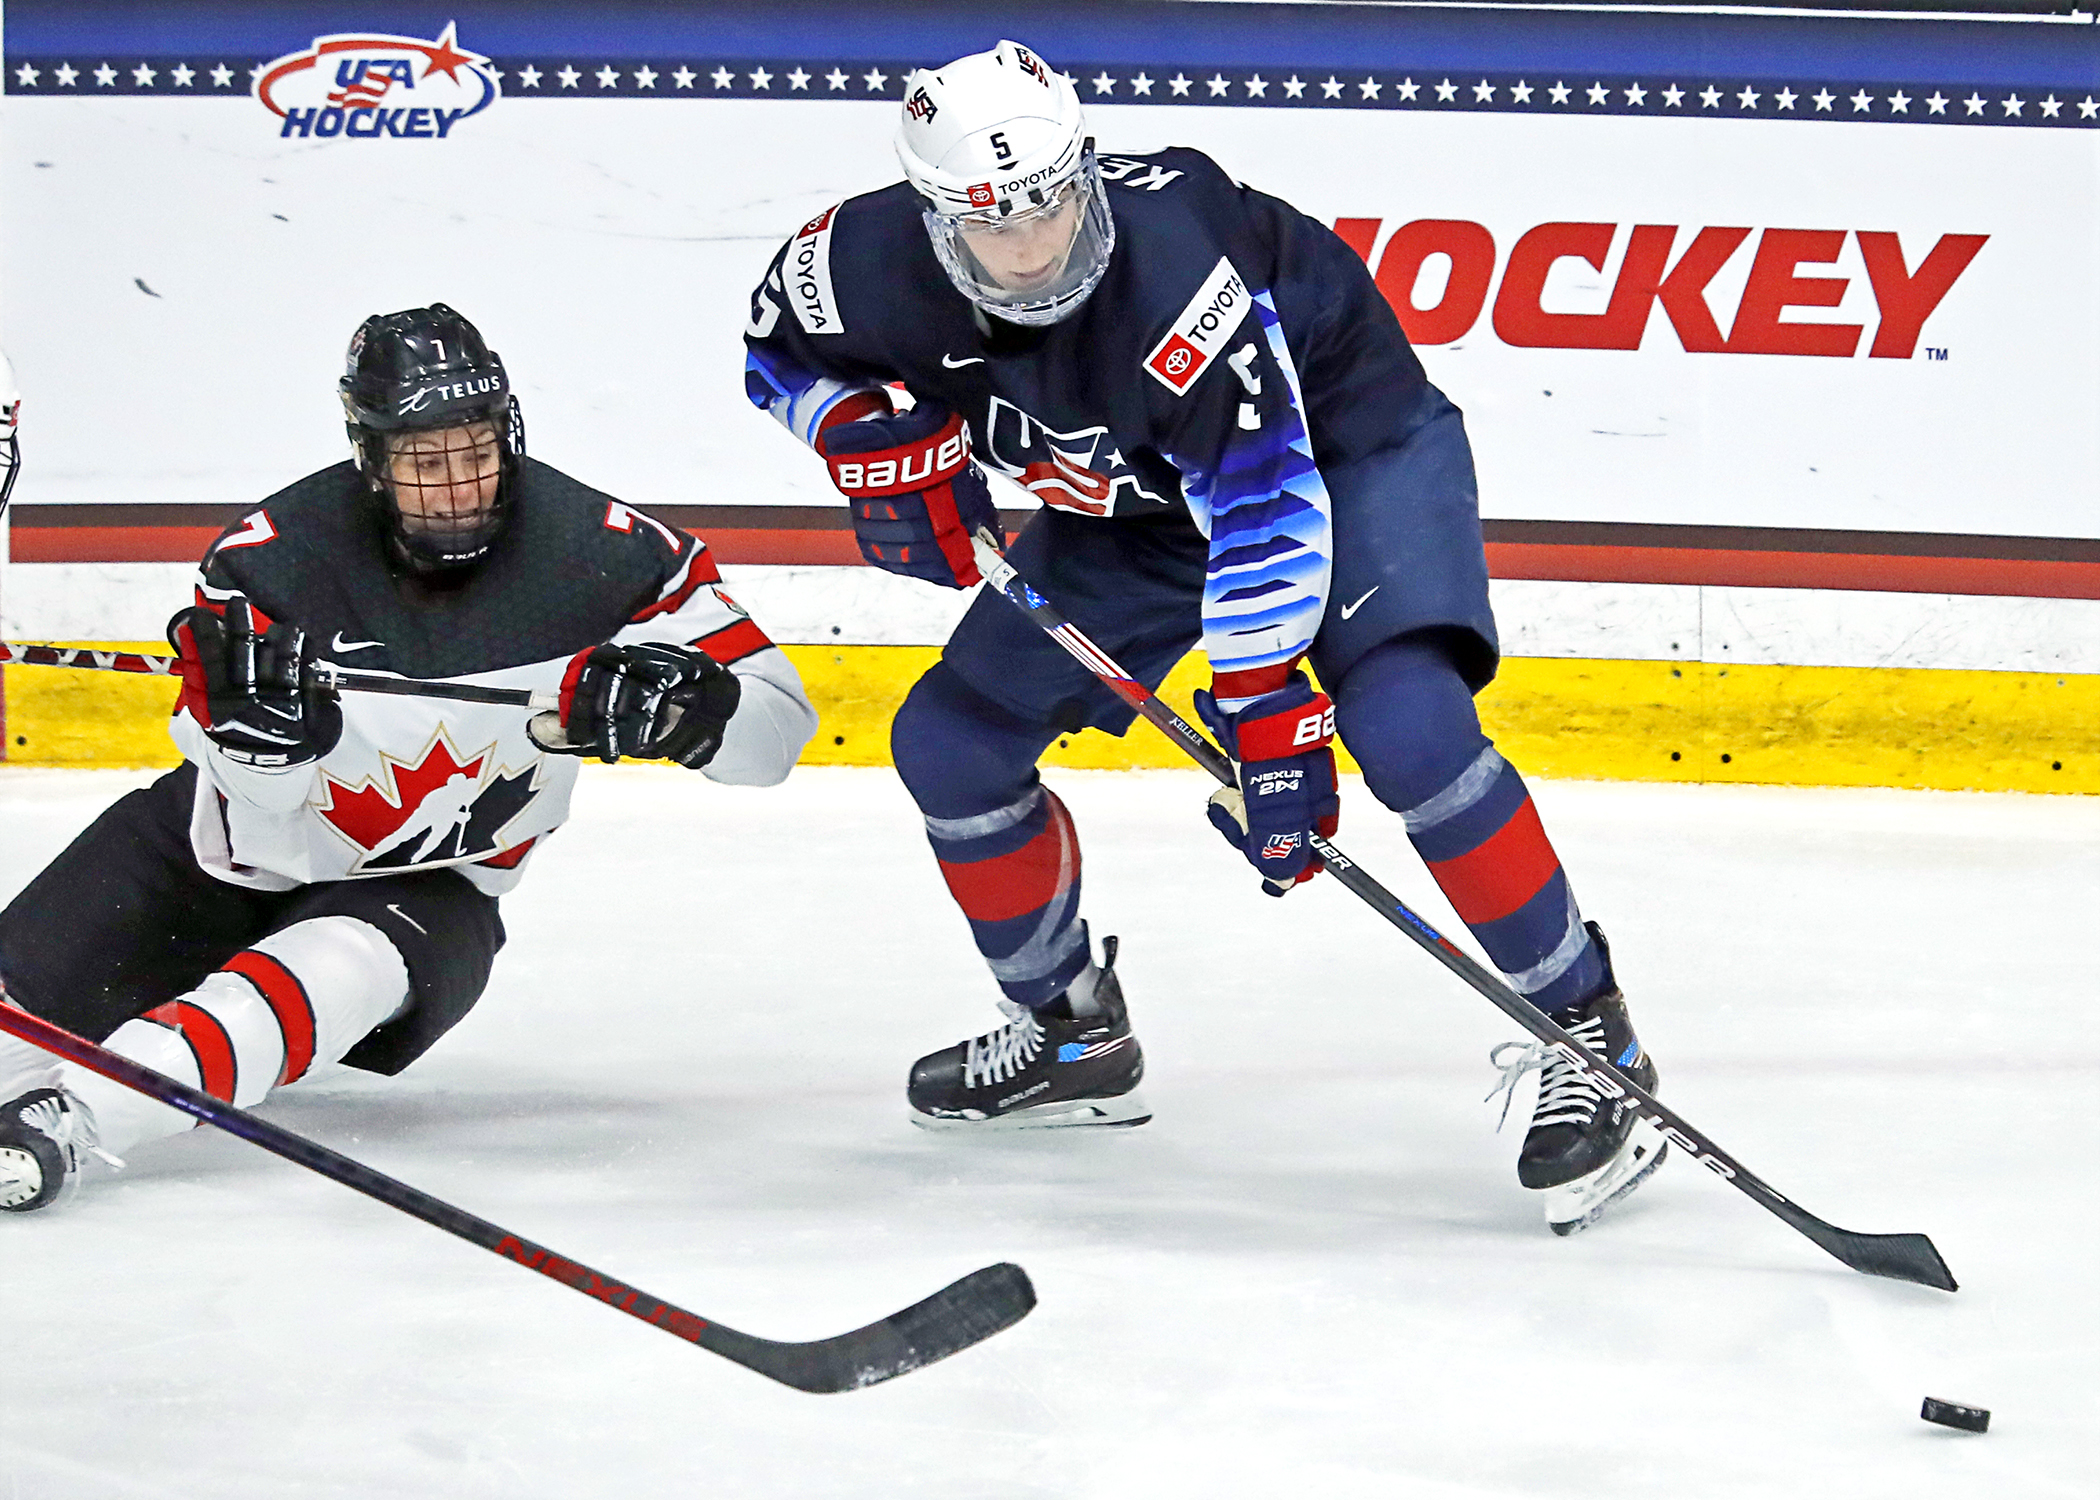 U.S. Women’s National Team to Face Off Against Canada in St. Louis